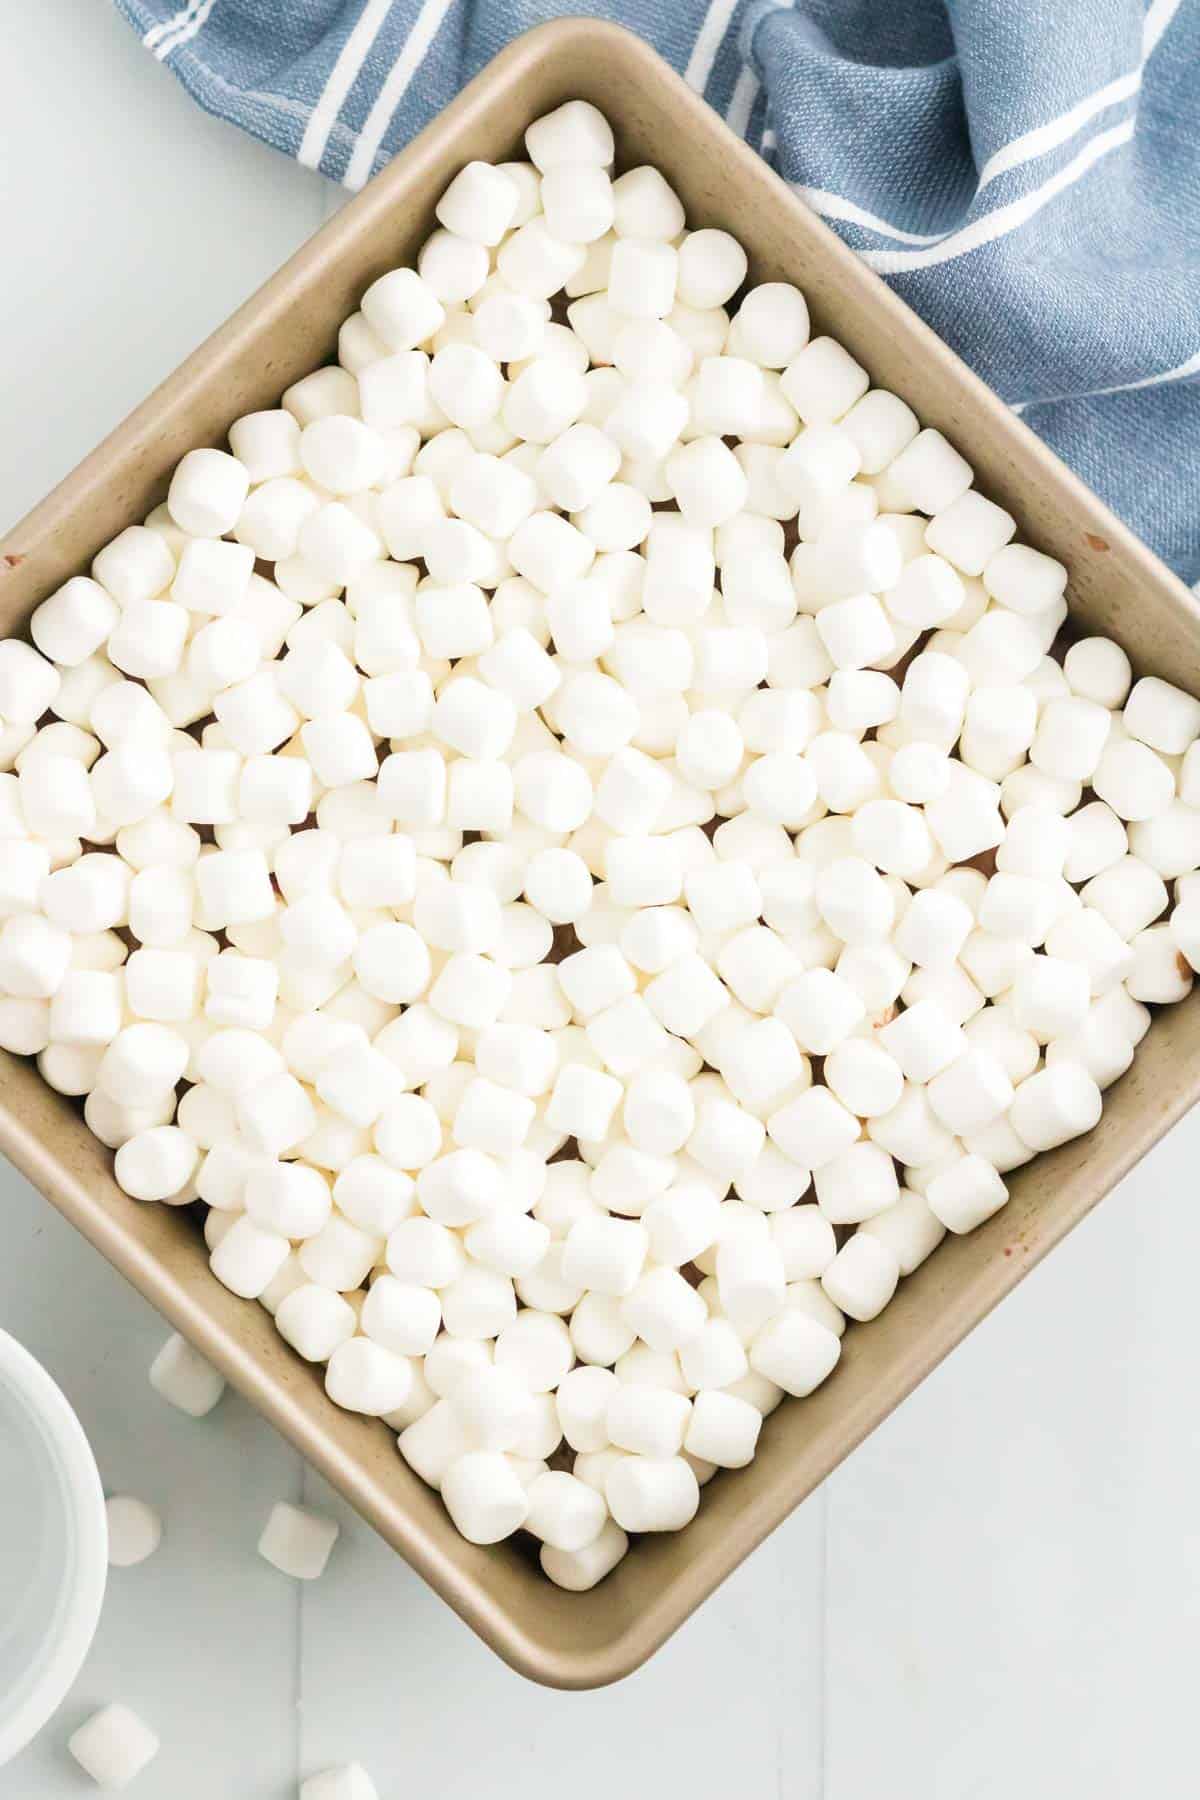 Mini marshmallows scattered on top of the pan of brownies.